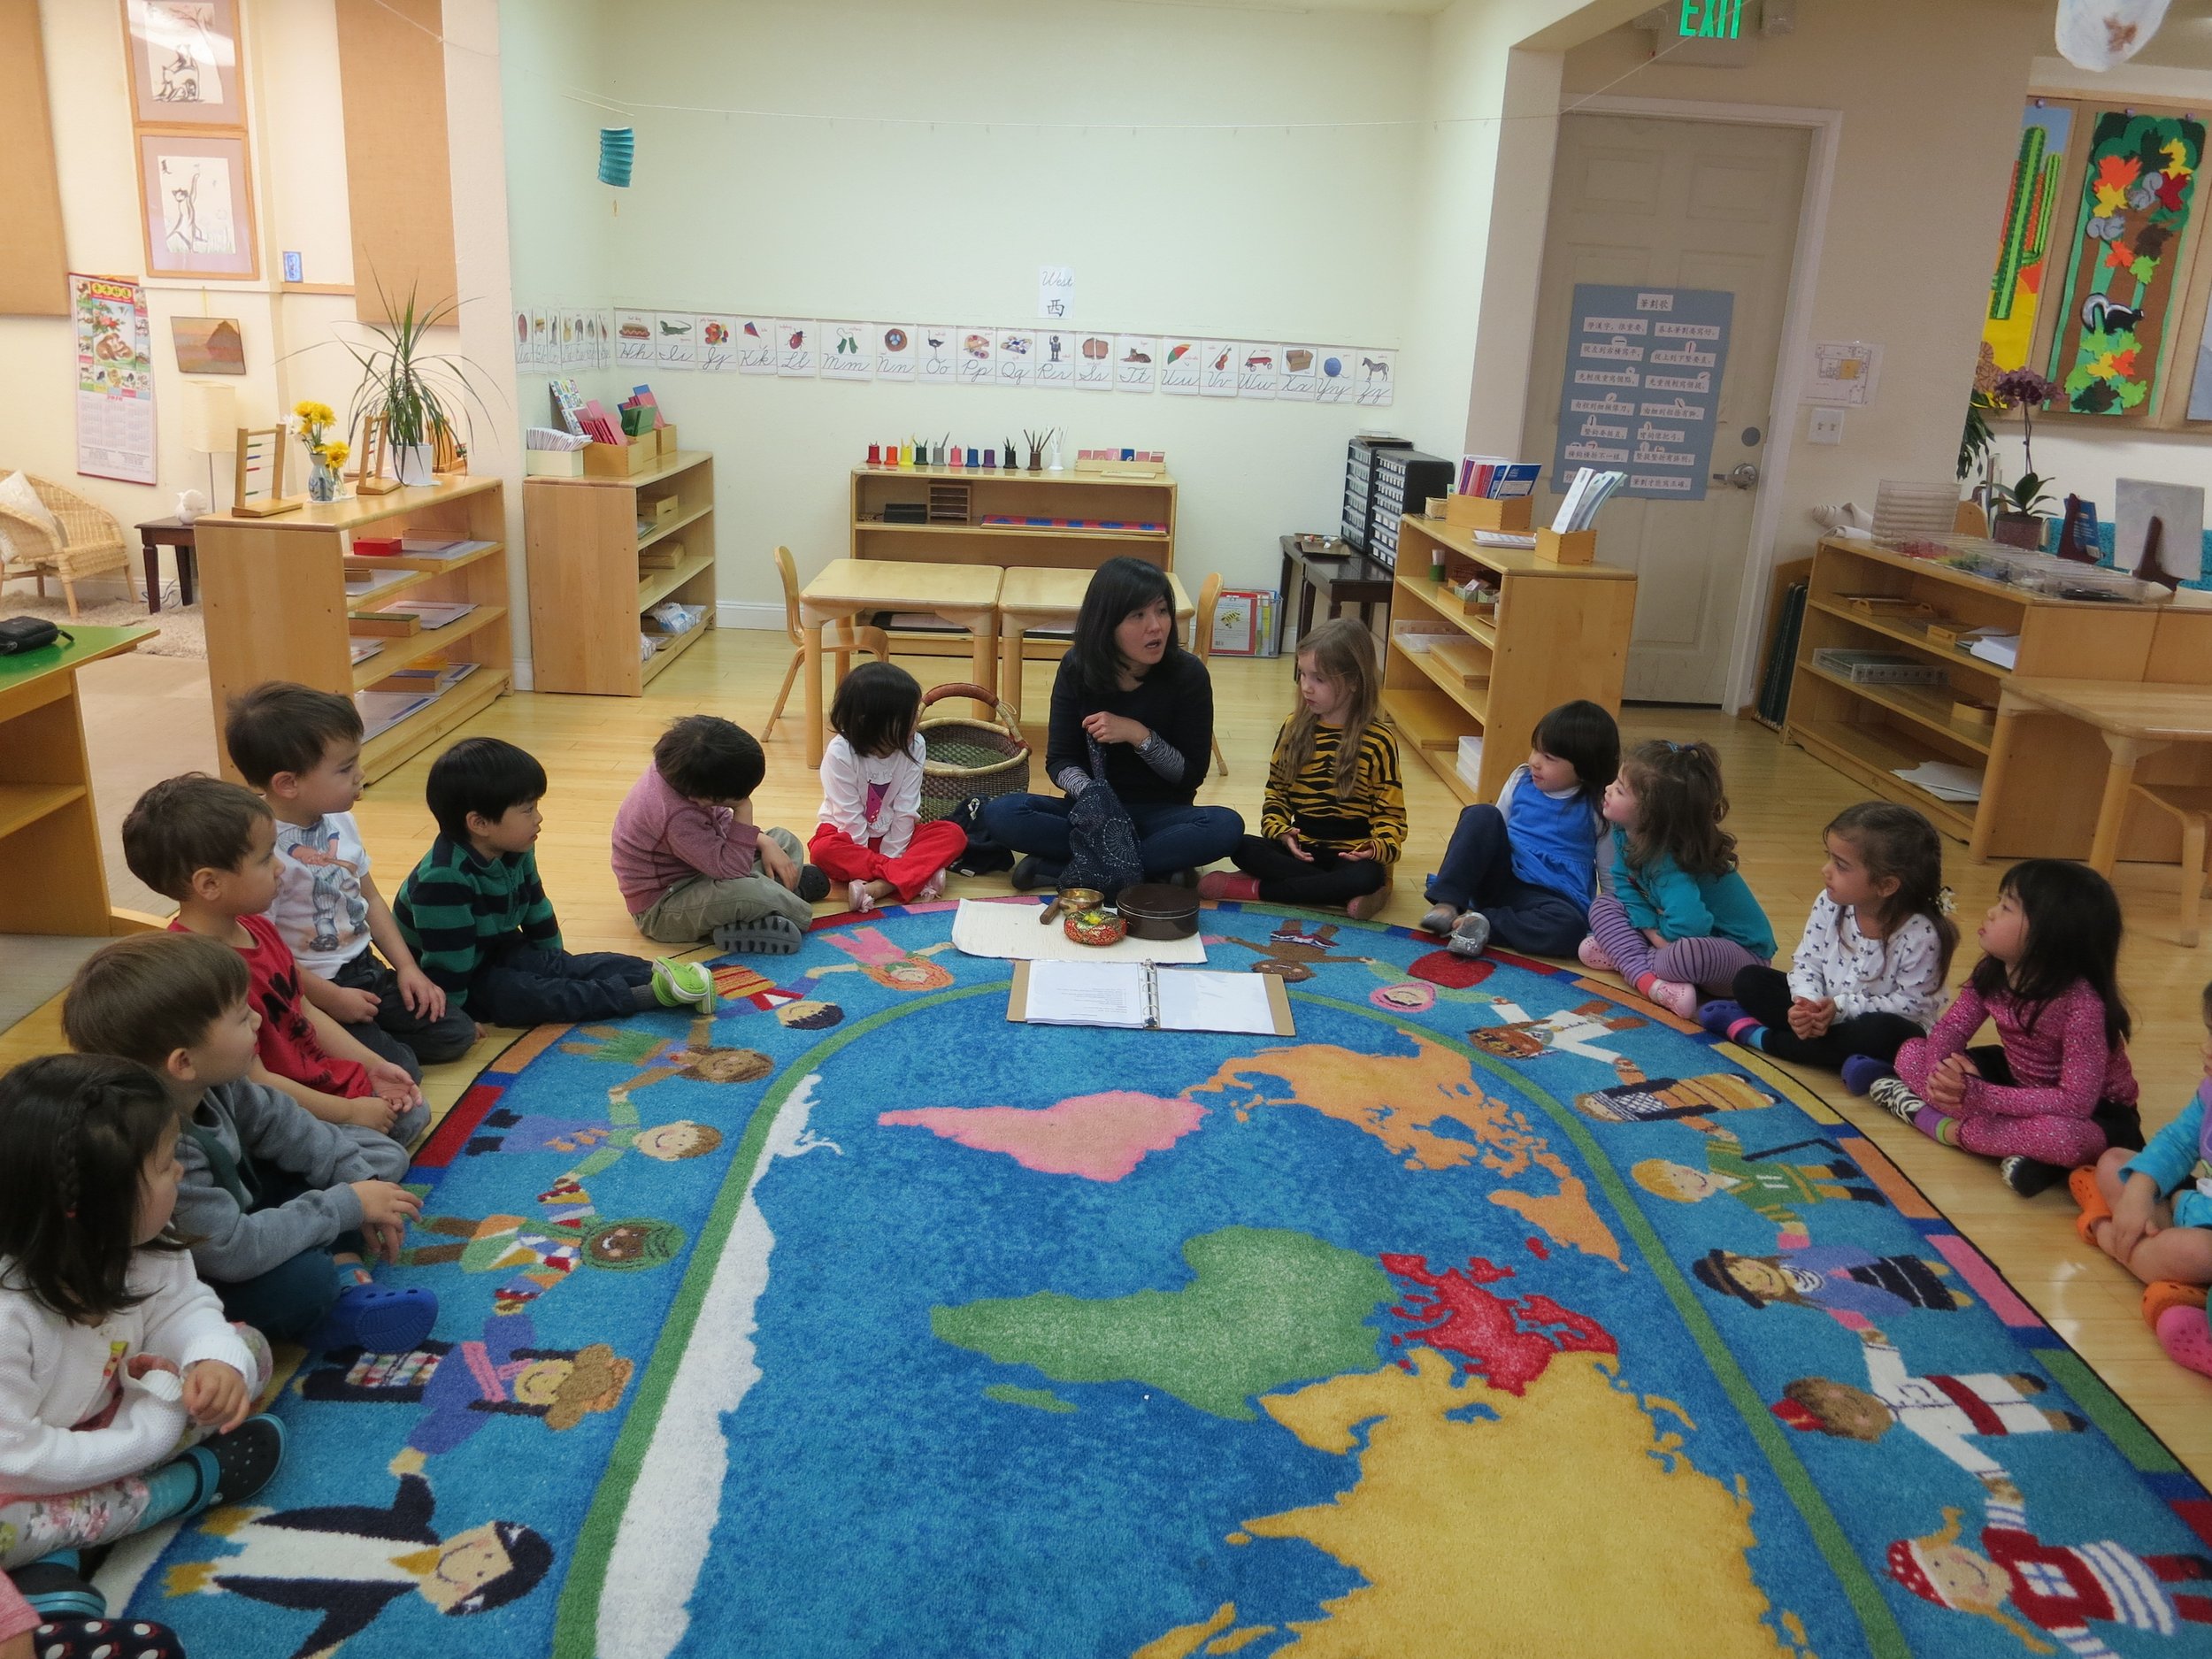 In-person weekly classes for children in a school setting